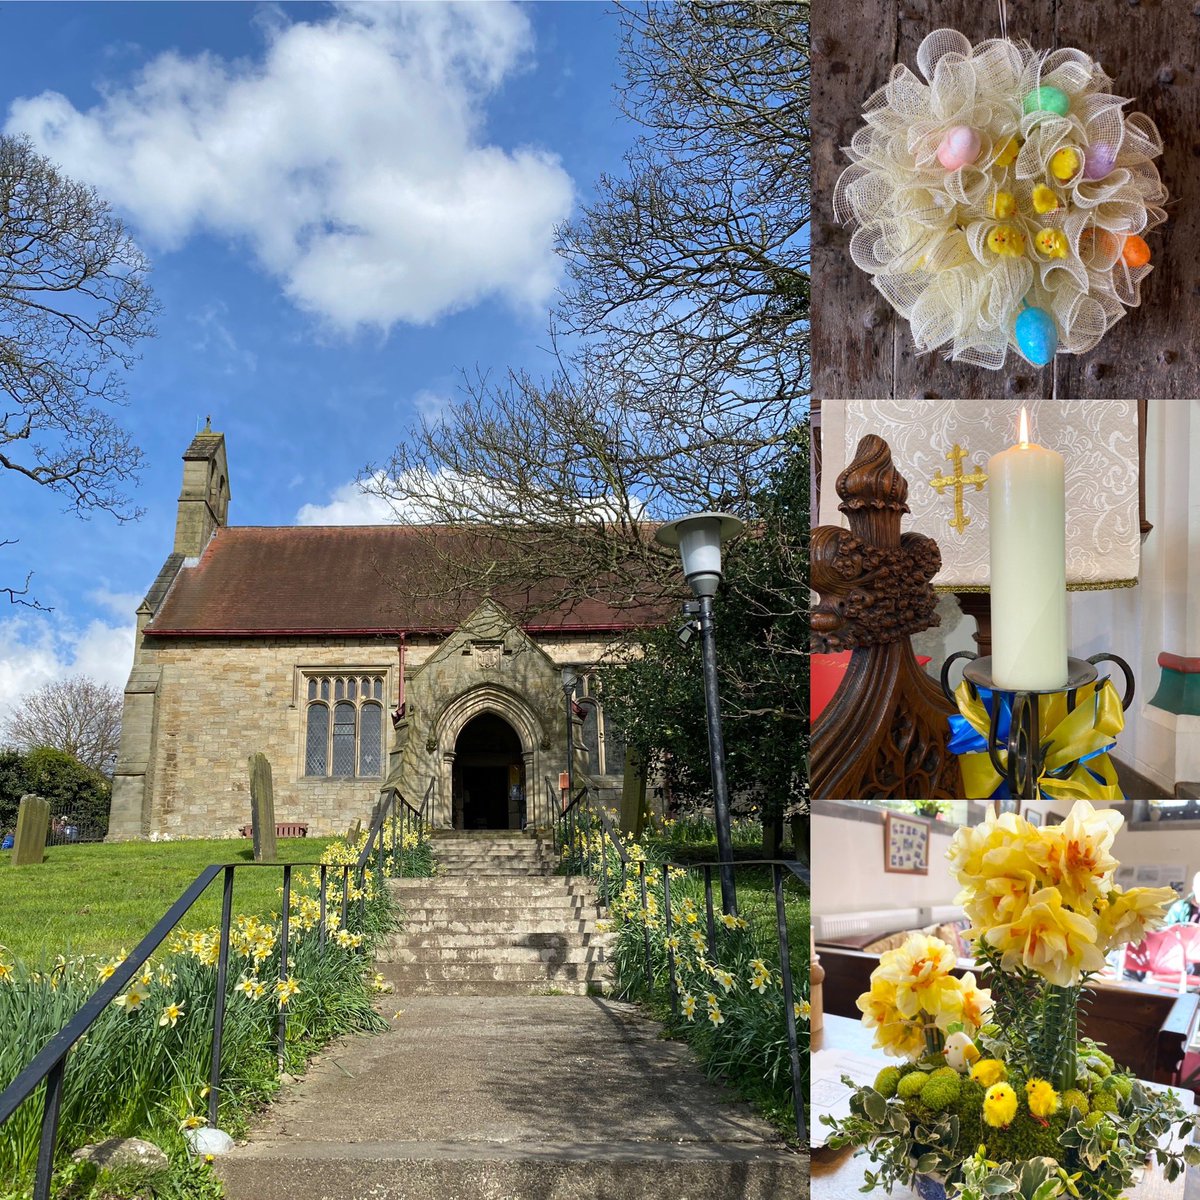 A sunny 🌞 start to #EasterSunday with a service @DioceseofDurham #Weardale 🕯️ ⛪️ 🐣 🐇 🌼